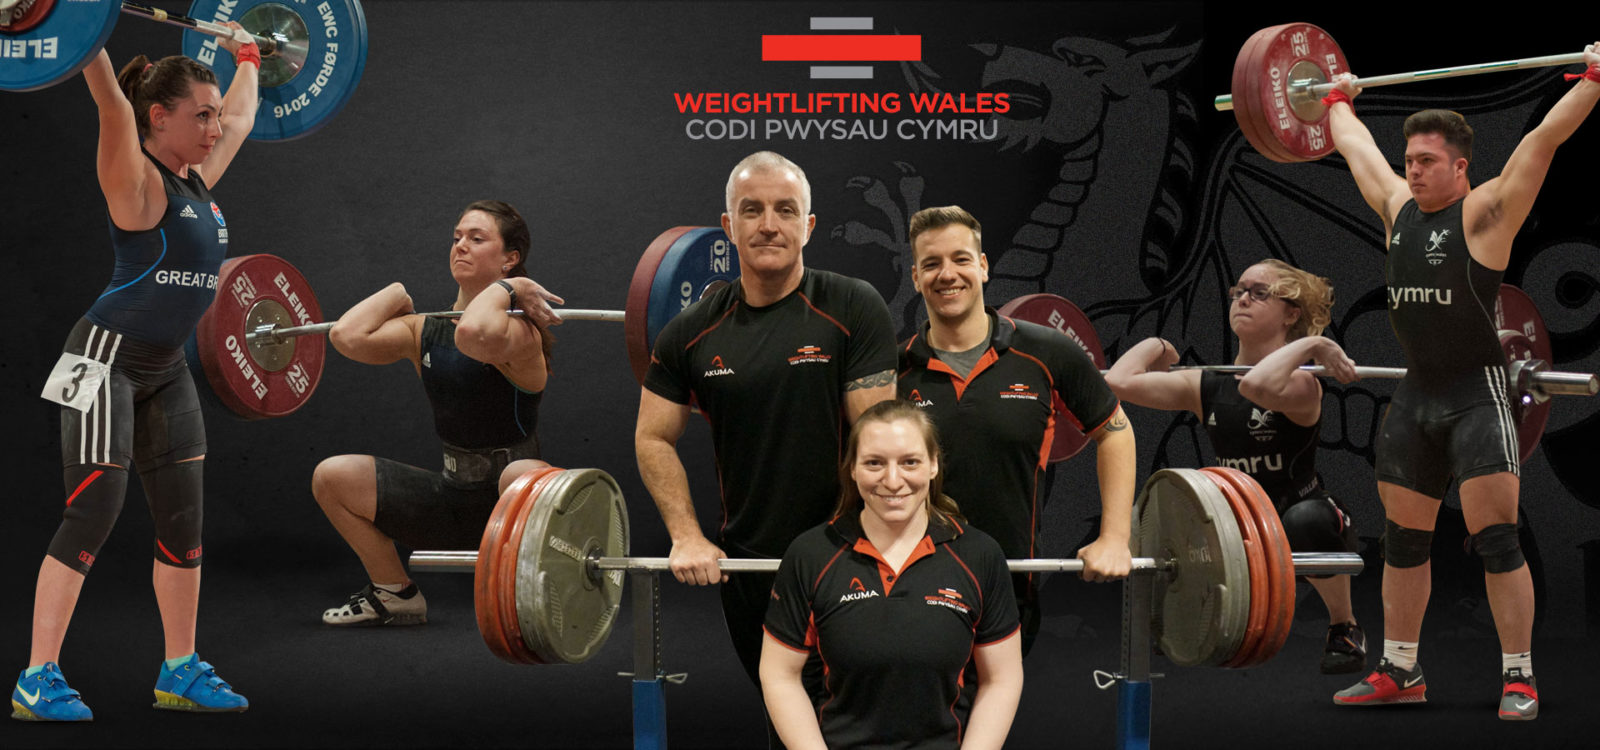  Weightlifting Wales Recruiting Non-Executive Board Director